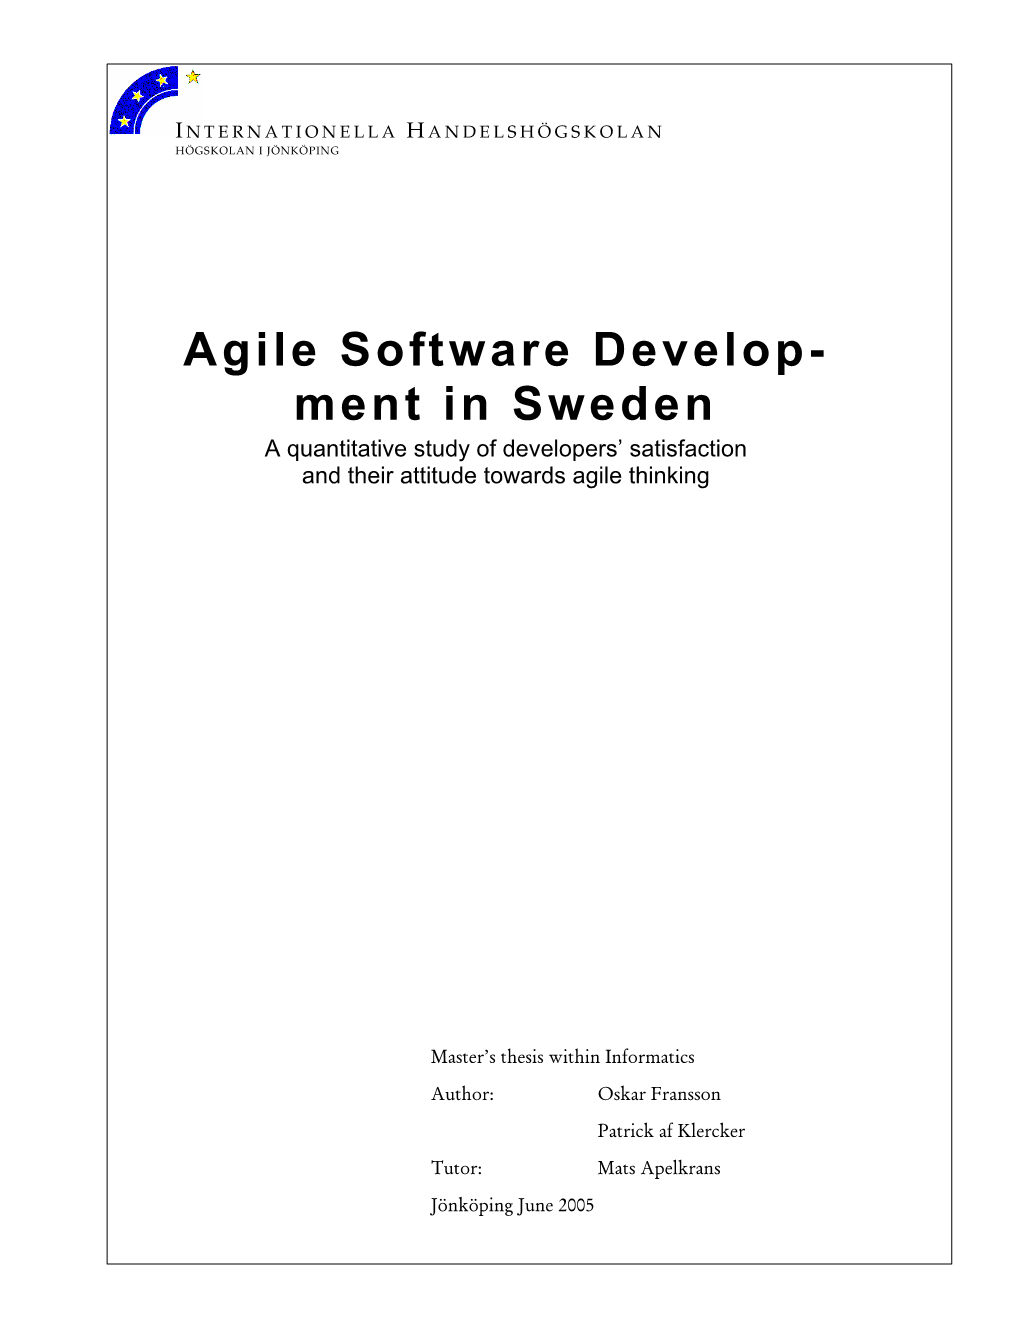 Agile Software Develop- Ment in Sweden a Quantitative Study of Developers’ Satisfaction and Their Attitude Towards Agile Thinking